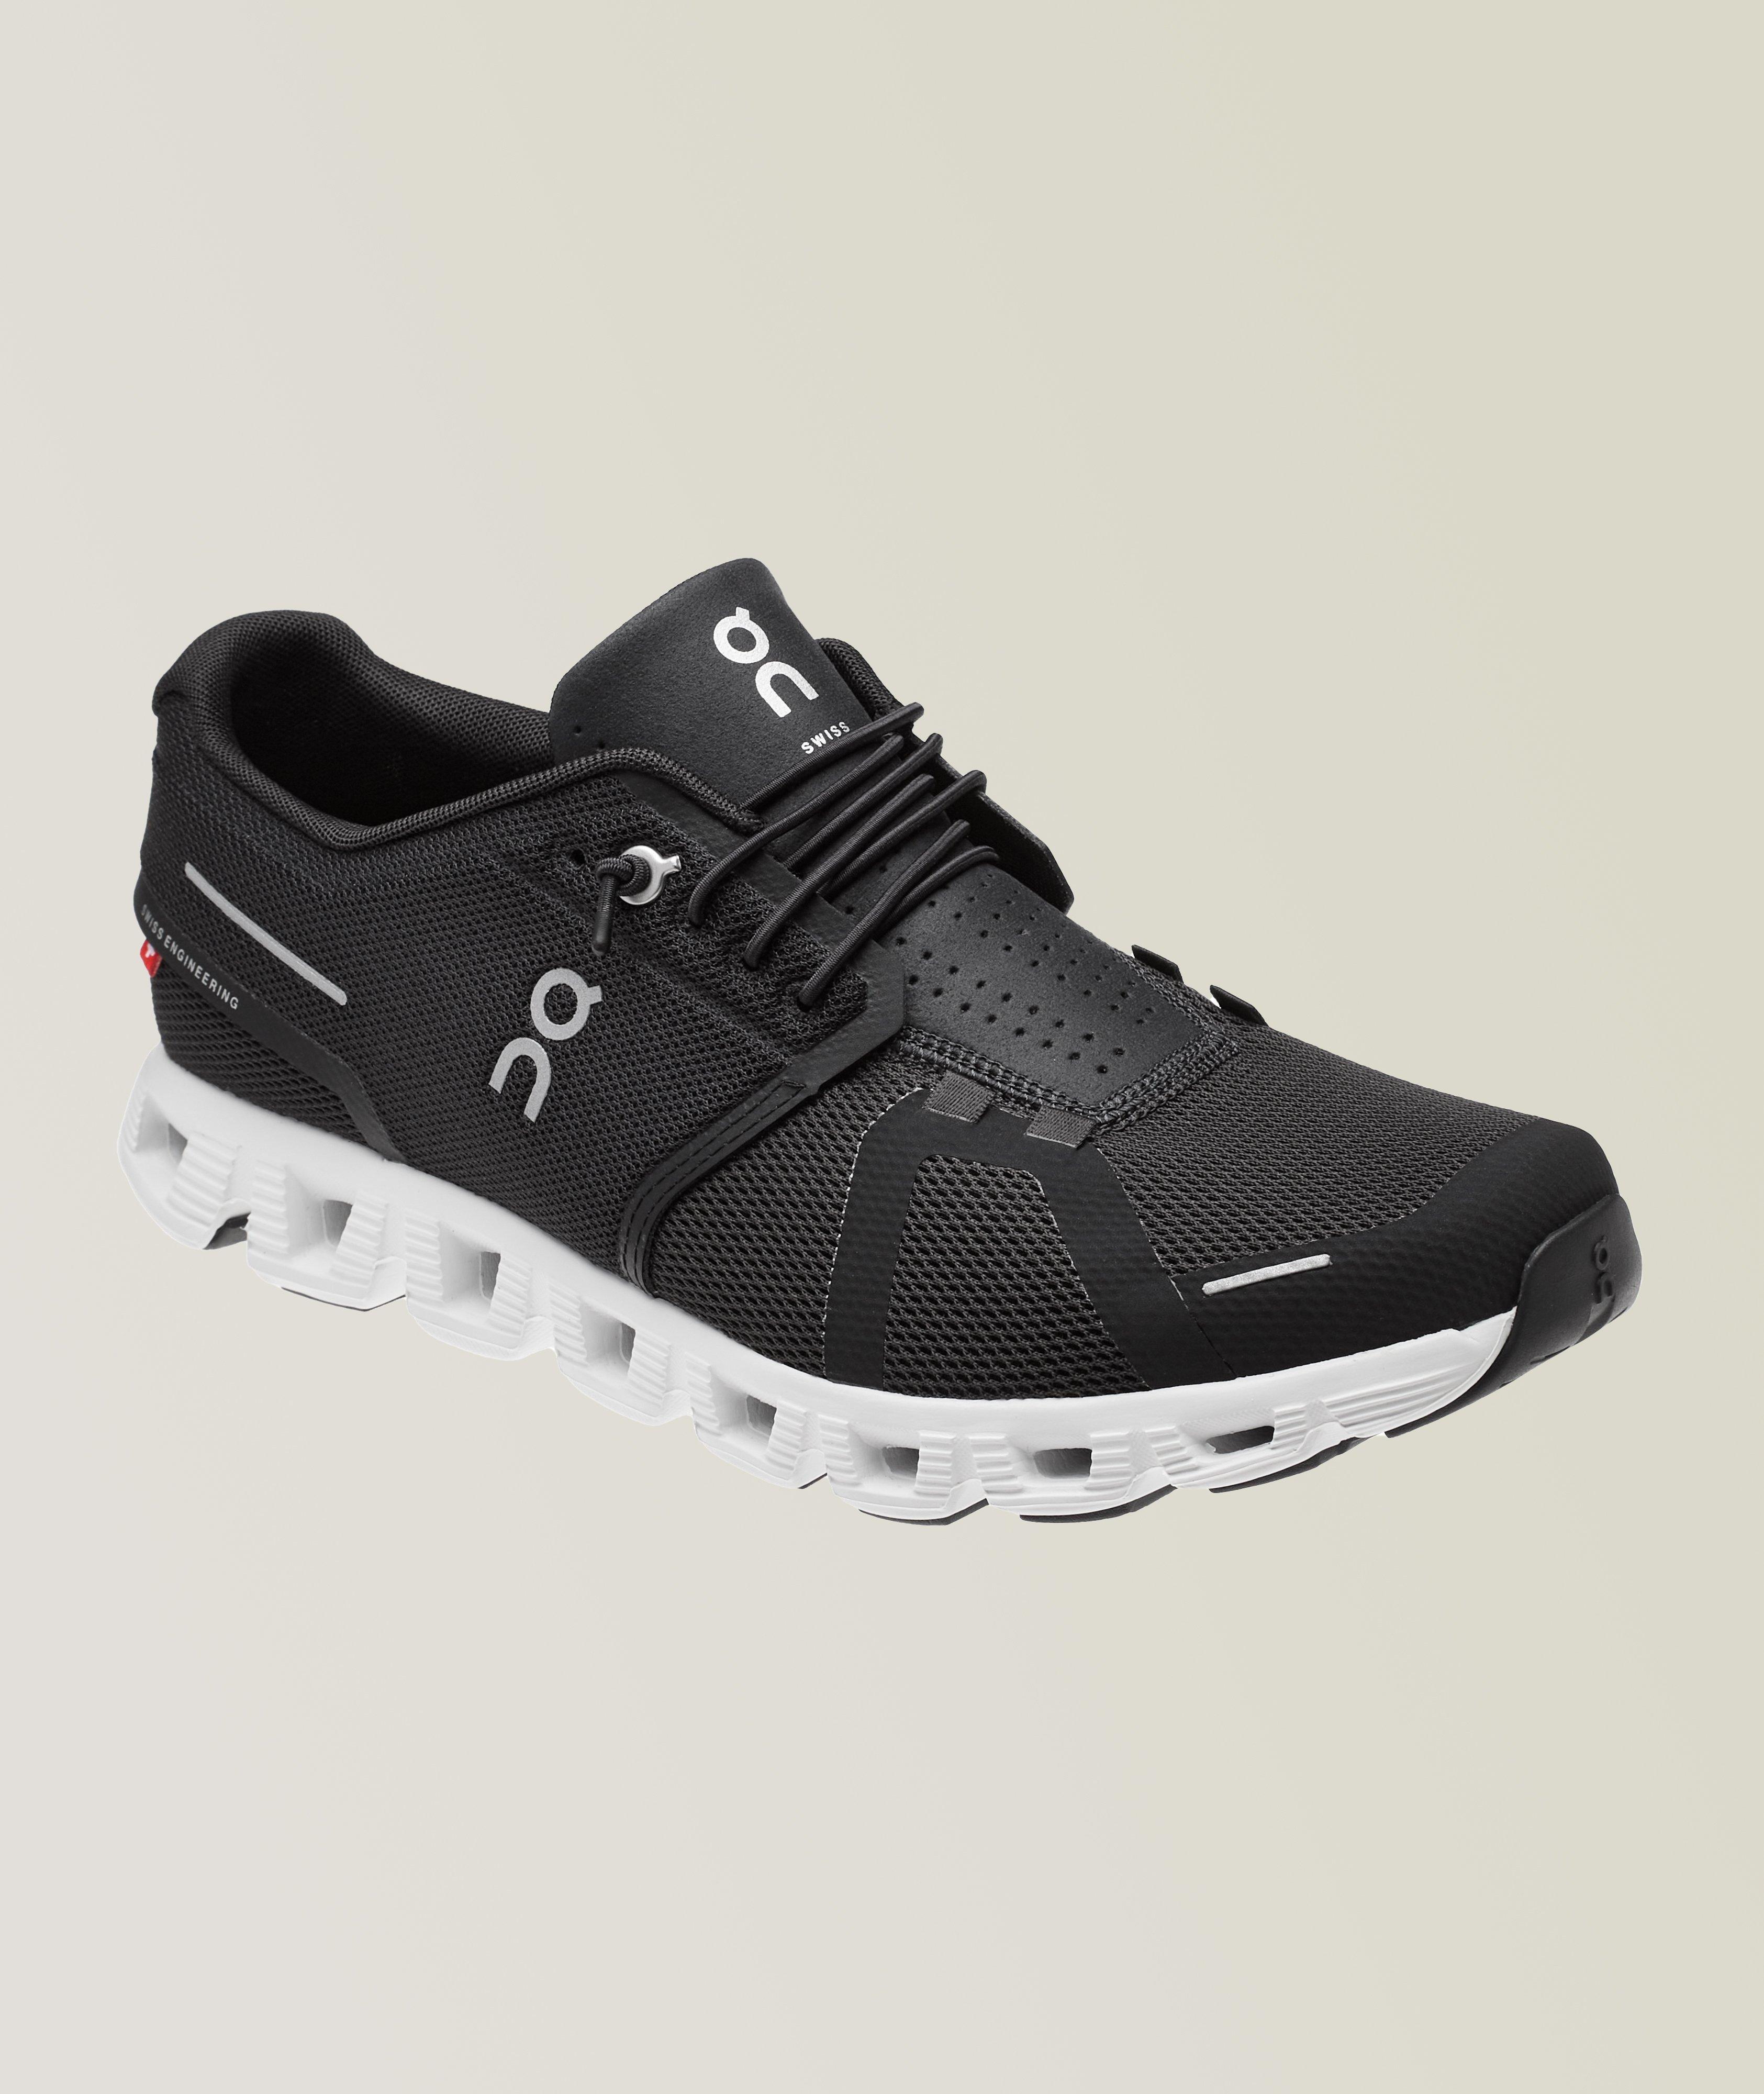 The Cloud 5 Running Shoes